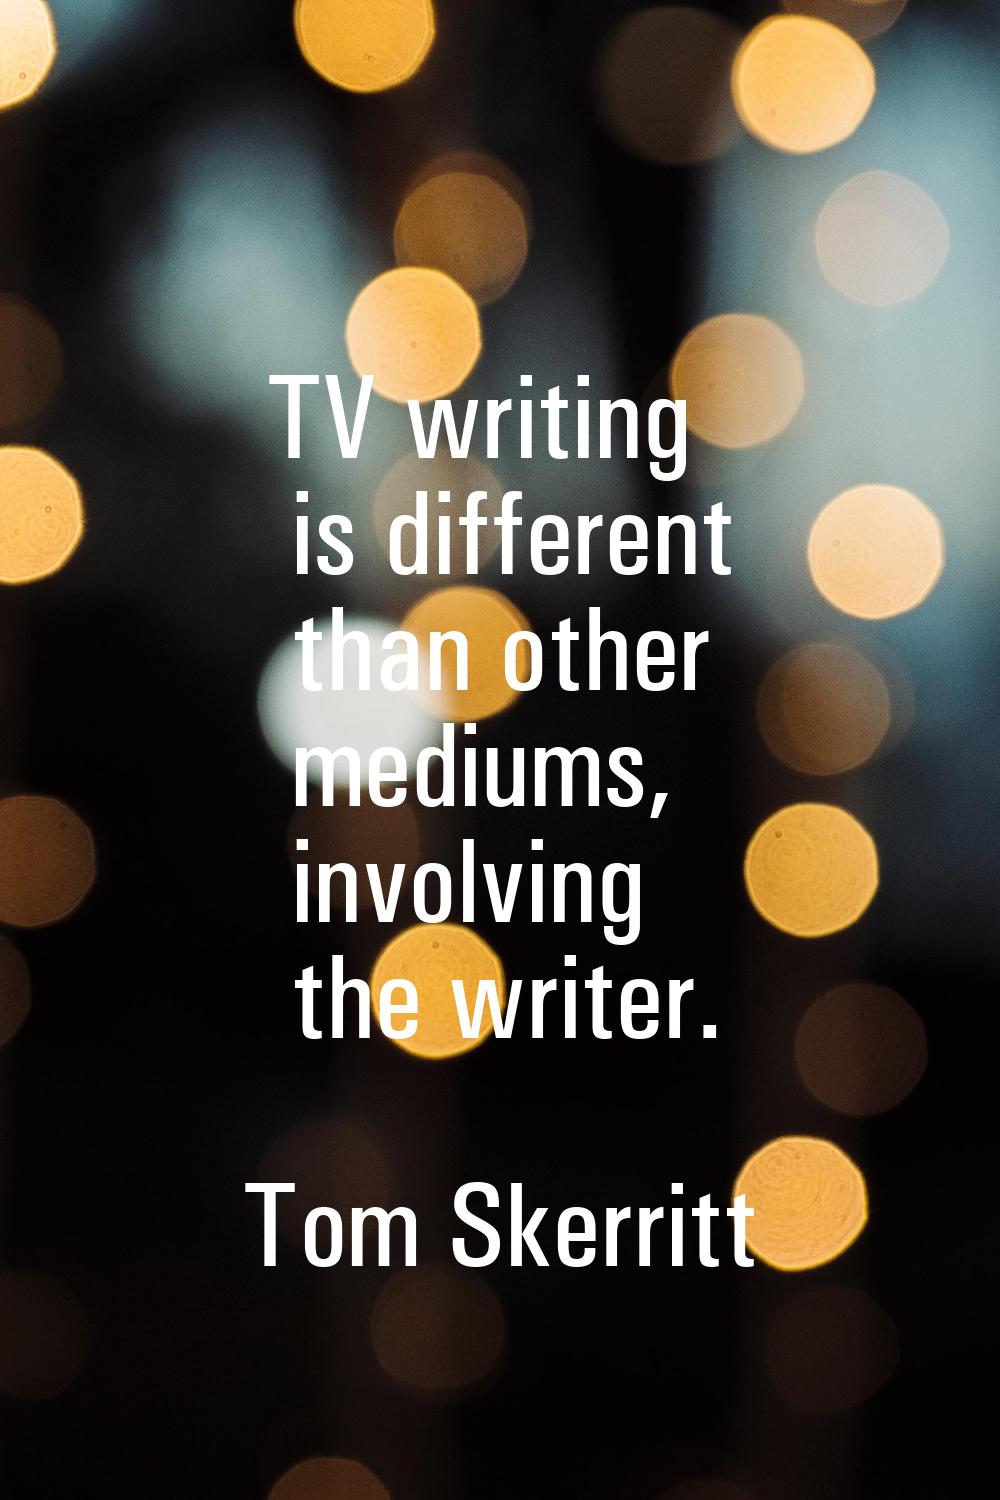 TV writing is different than other mediums, involving the writer.